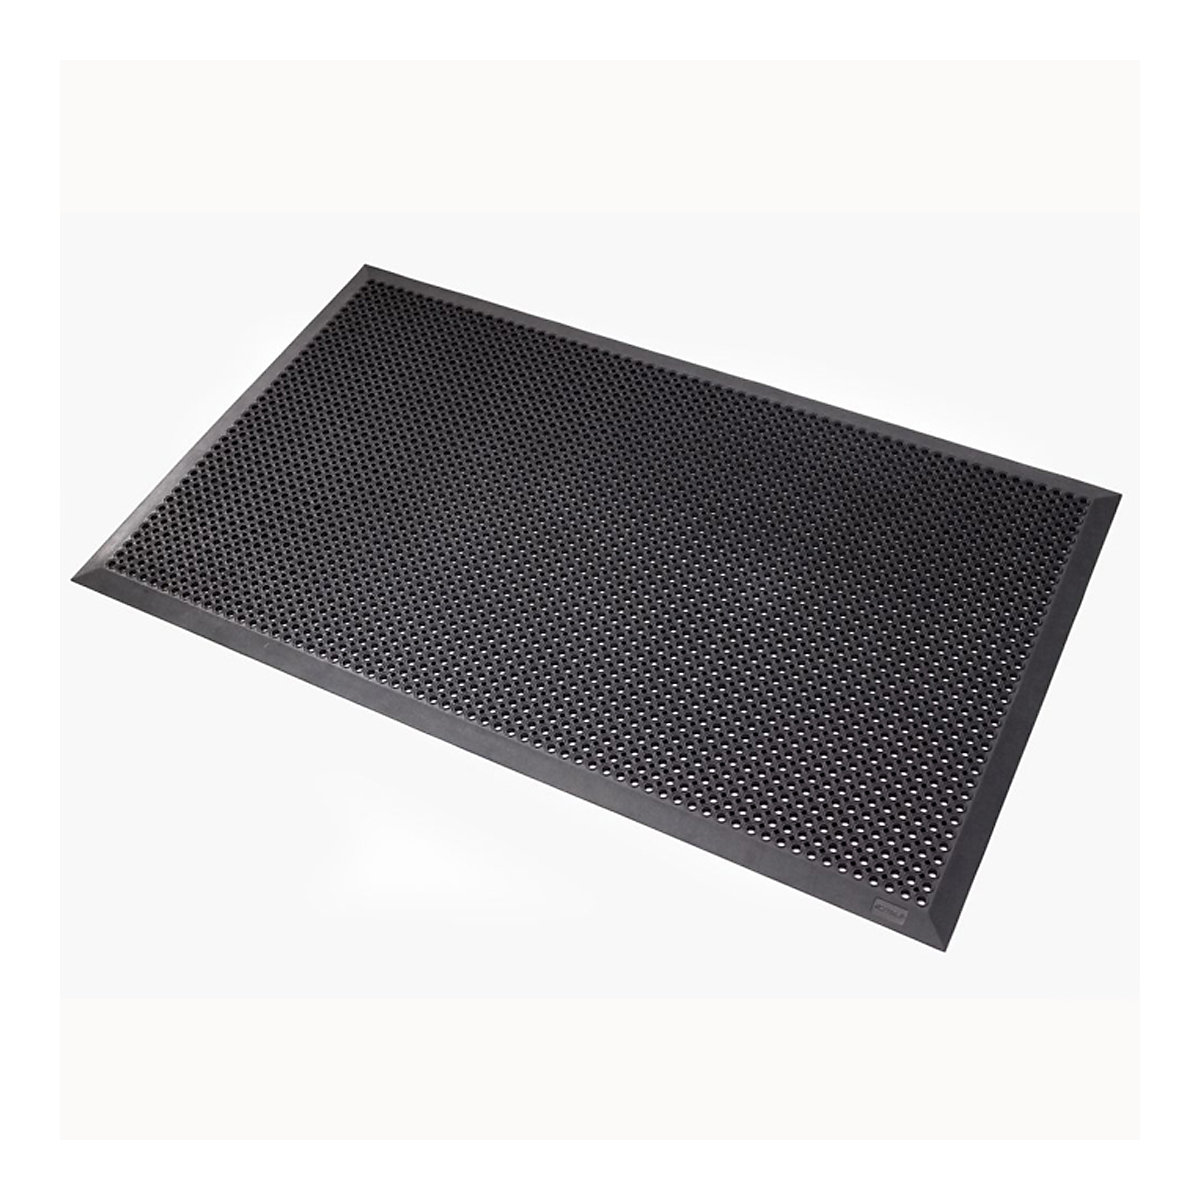 Entrance matting, suitable for wheelchairs – NOTRAX, black, LxW 1500 x 900 mm-6